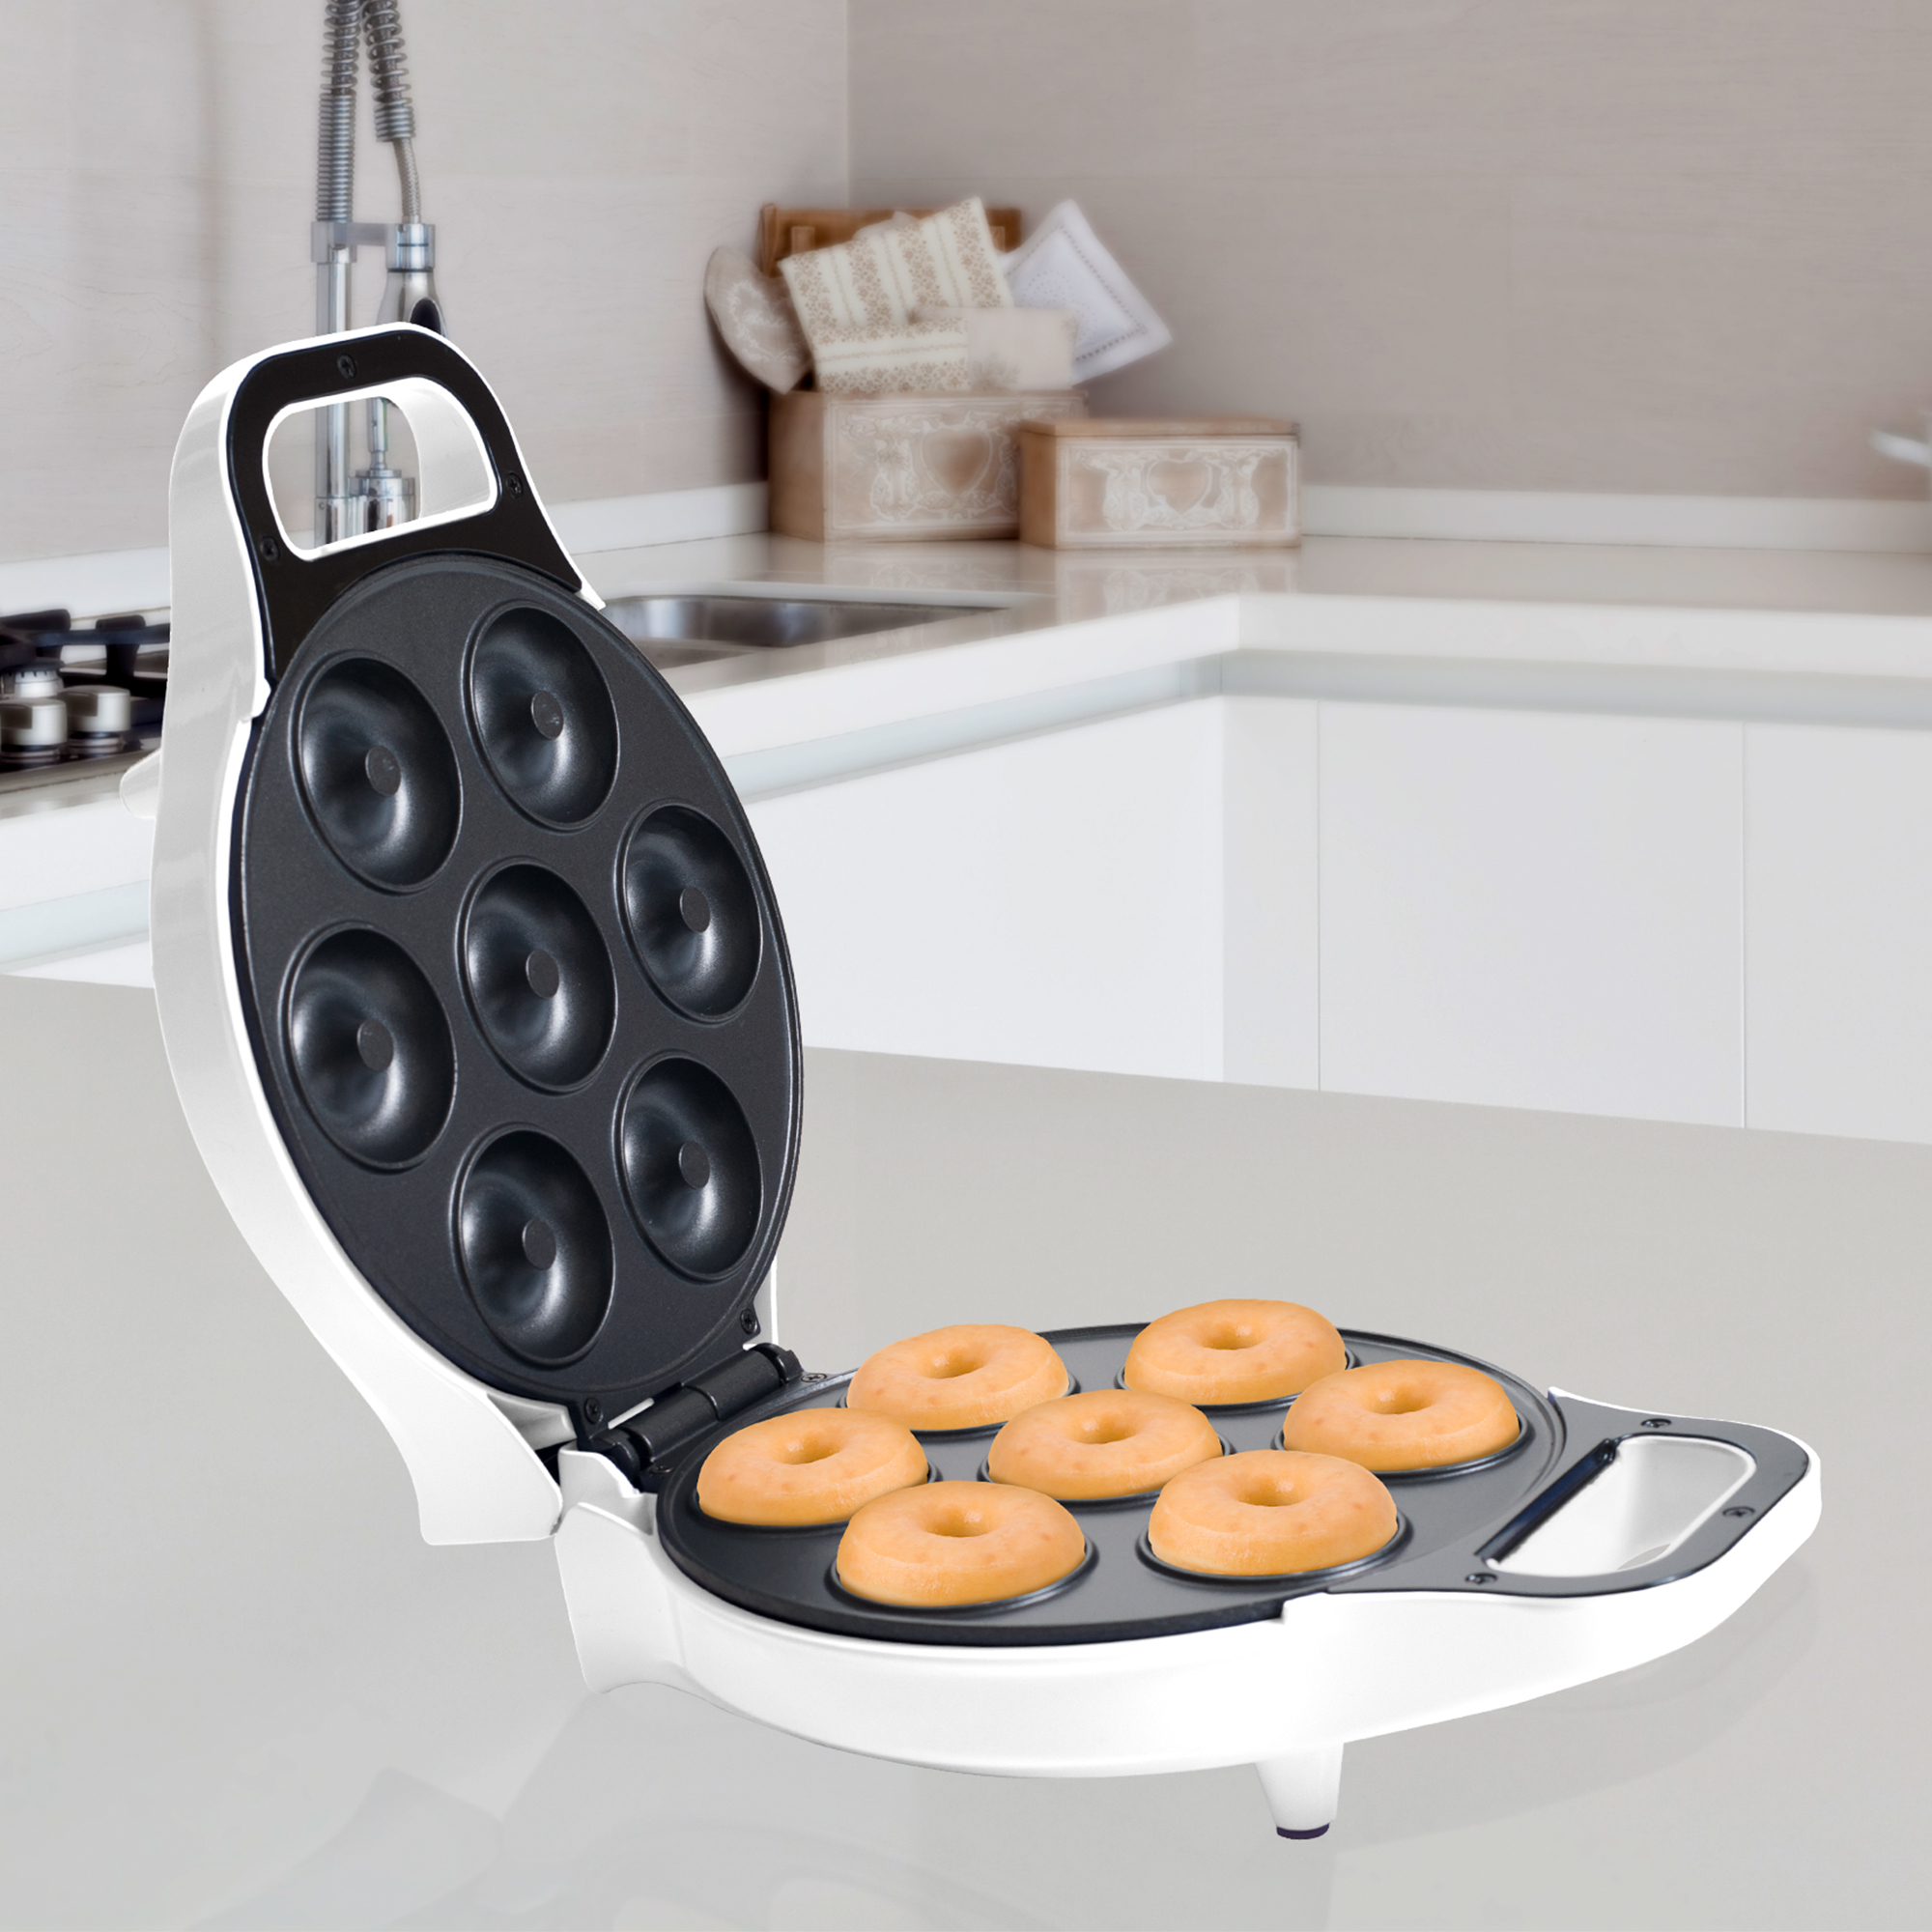 Electric Mini Donut Maker 7 Two-Inch Donuts Non Stick, No Oil or Frying Makes Donuts in 3 - 5 Minutes